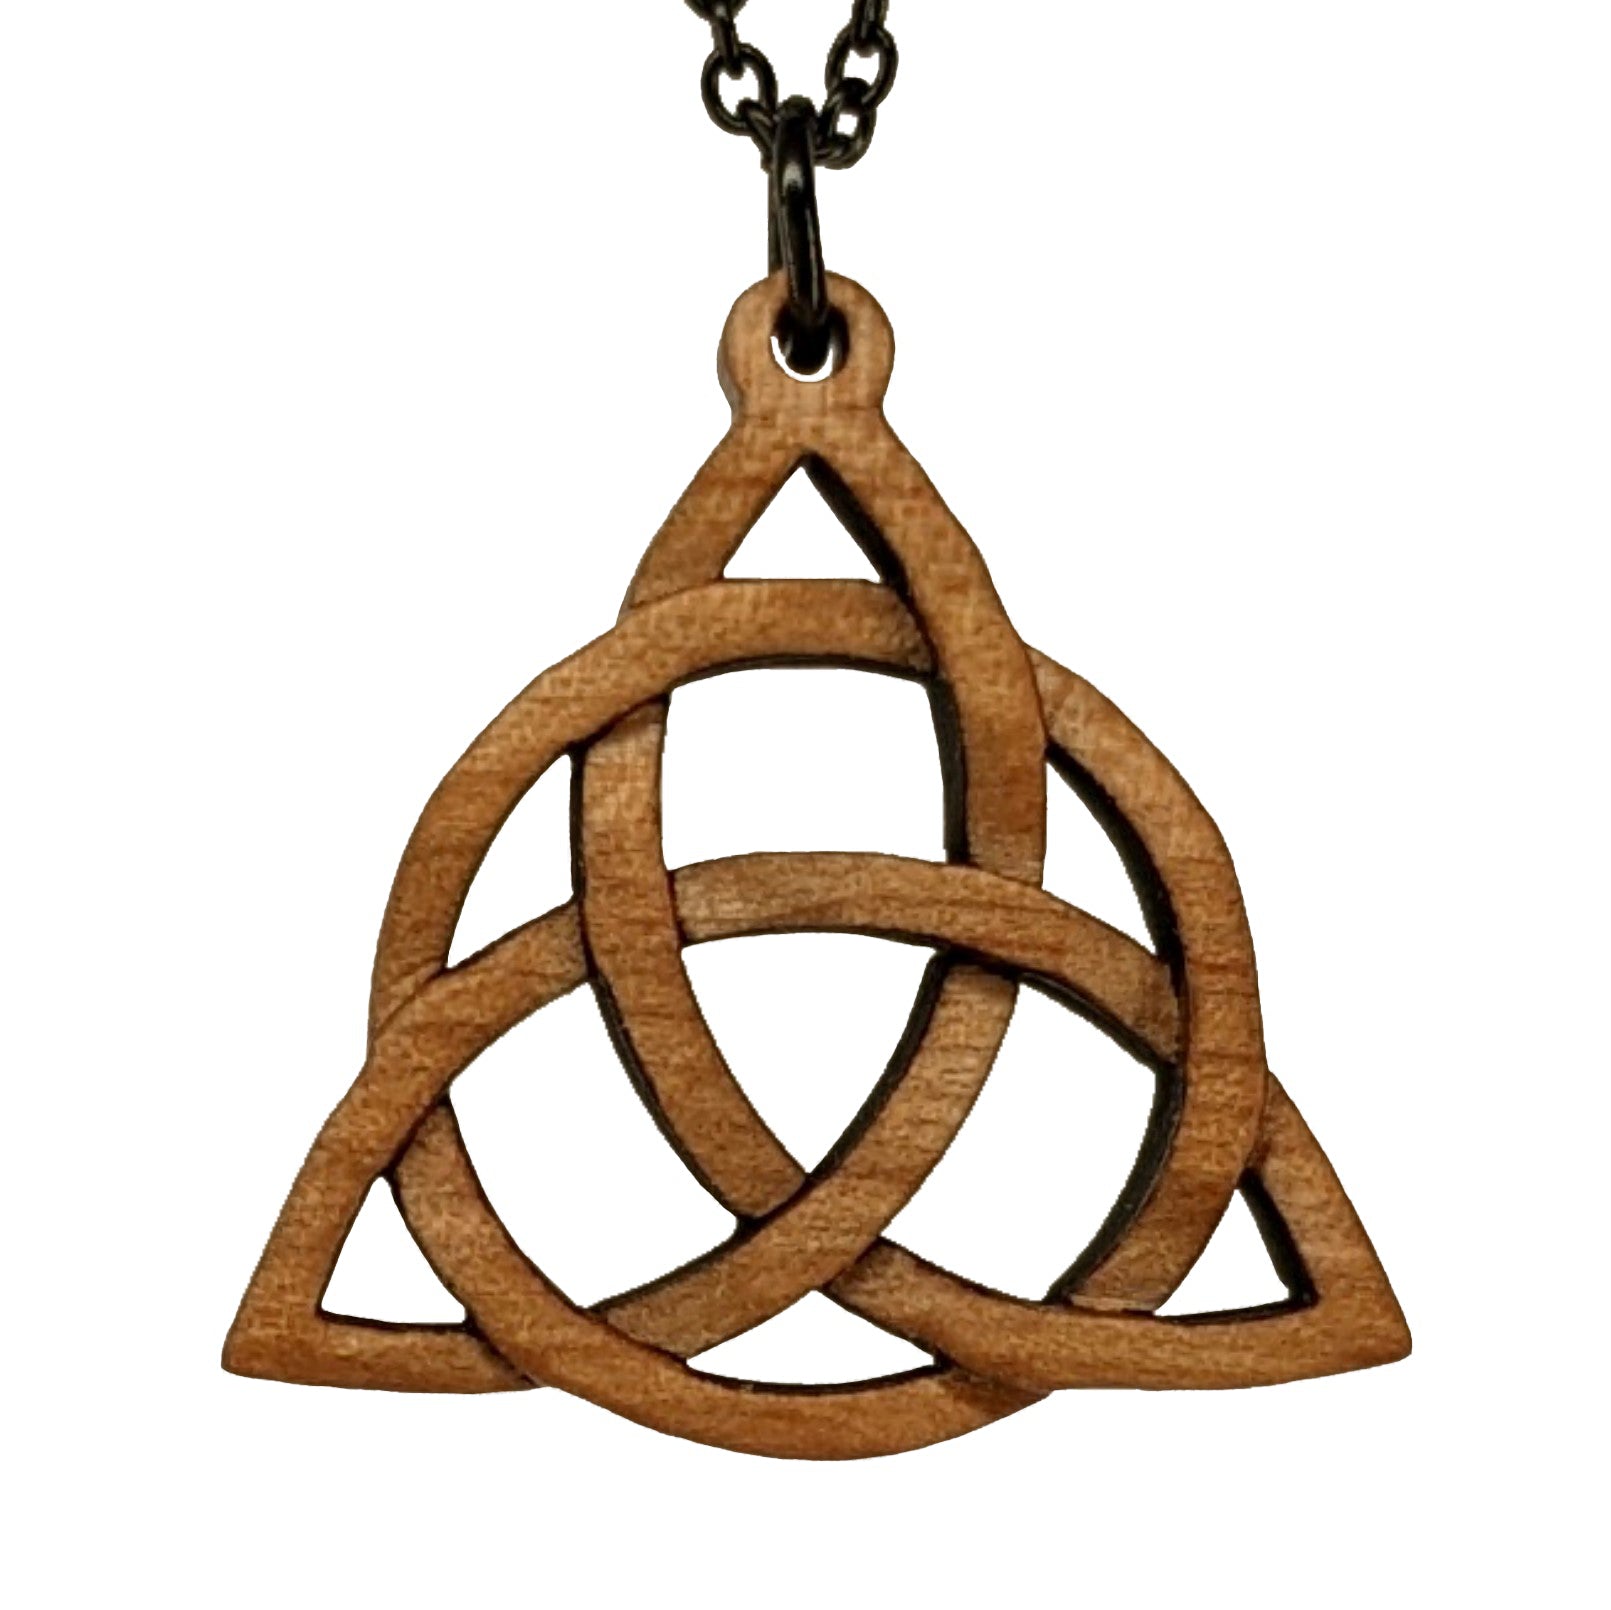 Wooden necklace pendant created in the style of a Celtic woven trinity symbol. Made from hard maple.  Hanging from a black stainless steel chain against a white background.